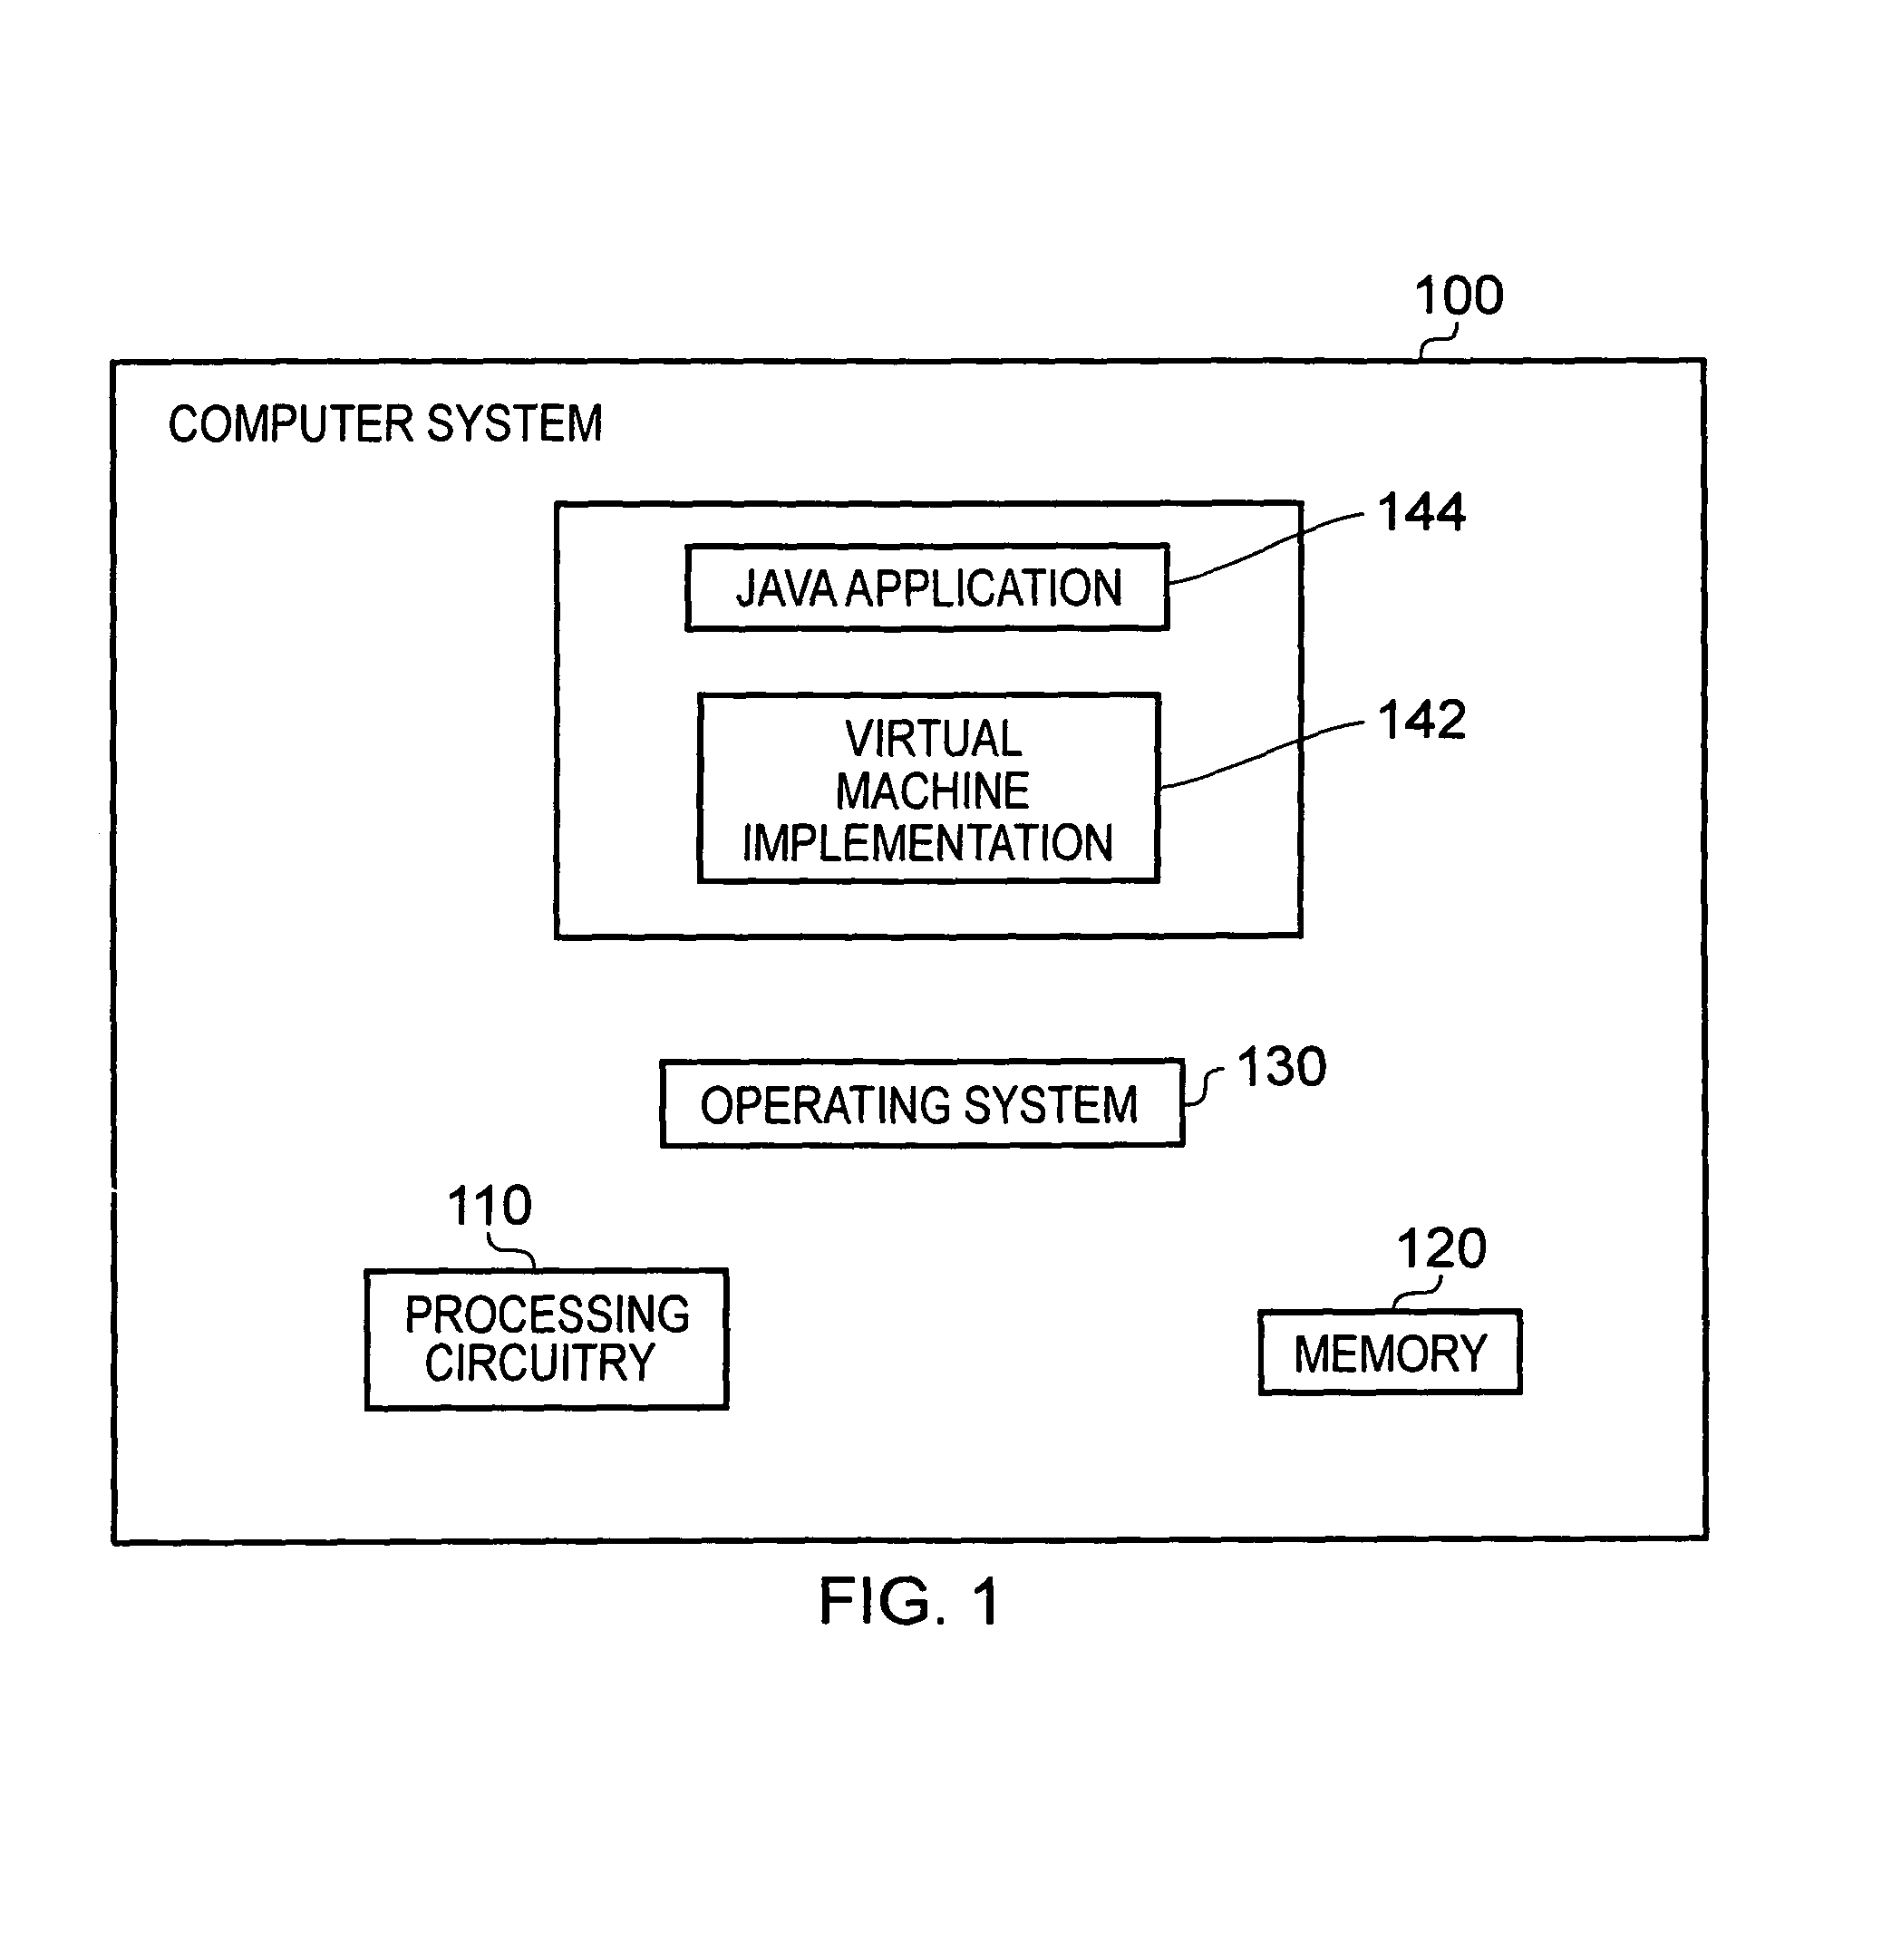 Software-based unloading and reloading of an inactive function to reduce memory usage of a data processing task performed using a virtual machine